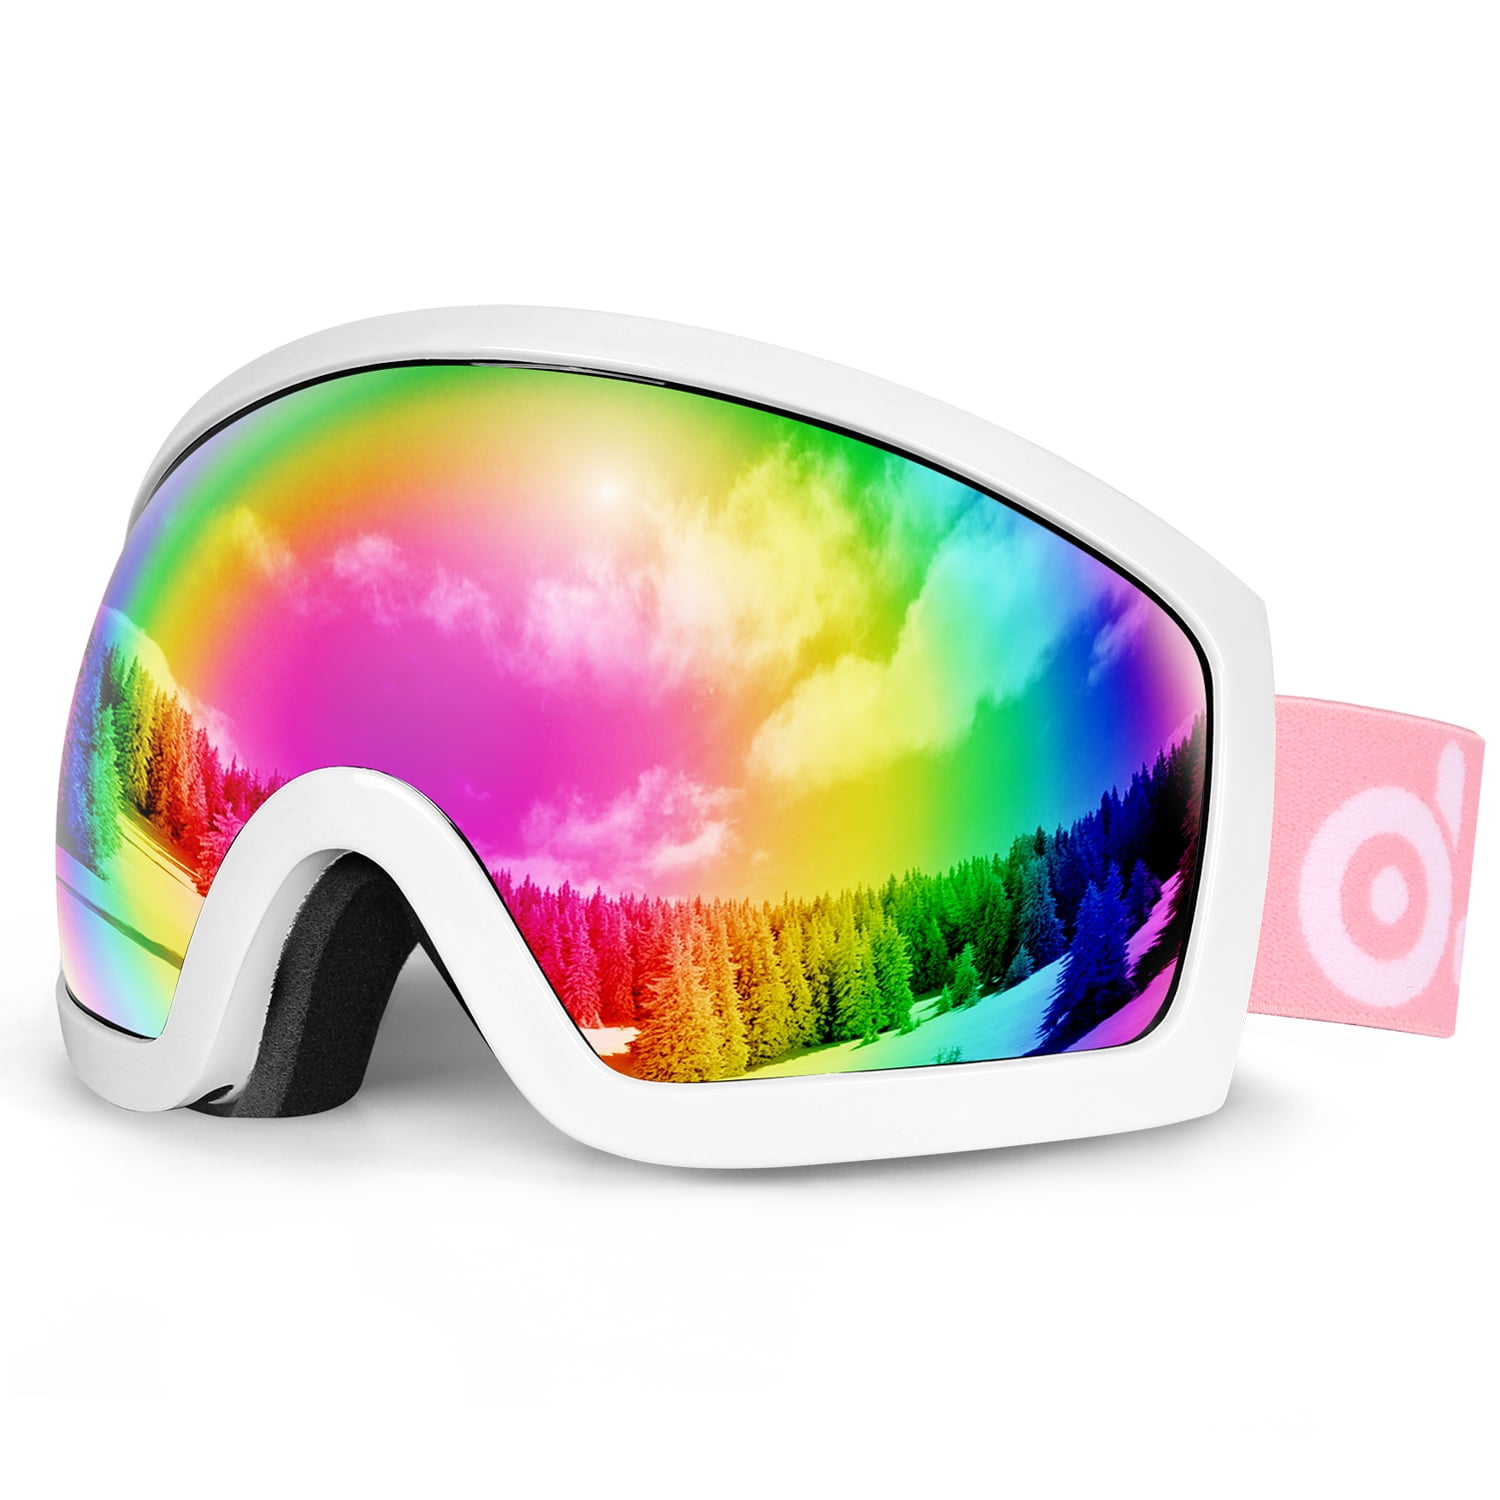 Snow Ski Goggles Glass Supertrip TM Outdoor Windproof Motorcycle Riding Ski 